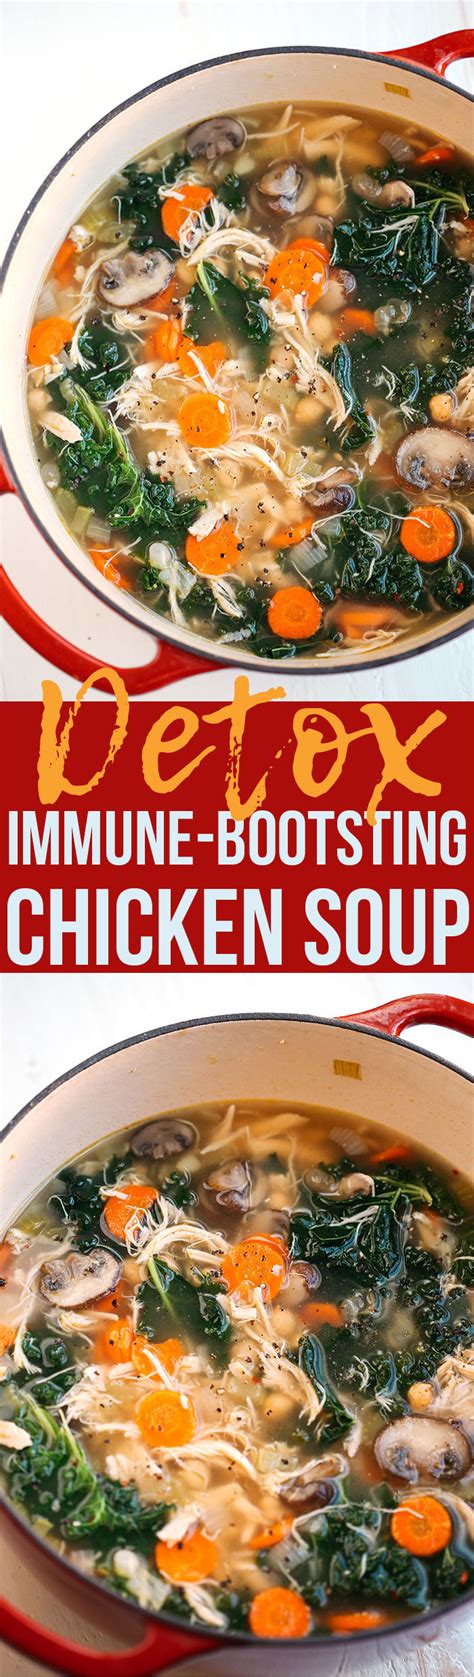 I appreciated the hint to cut the carrots, celery and onions in half. Detox Immune-Boosting Chicken Soup - Eat Yourself Skinny